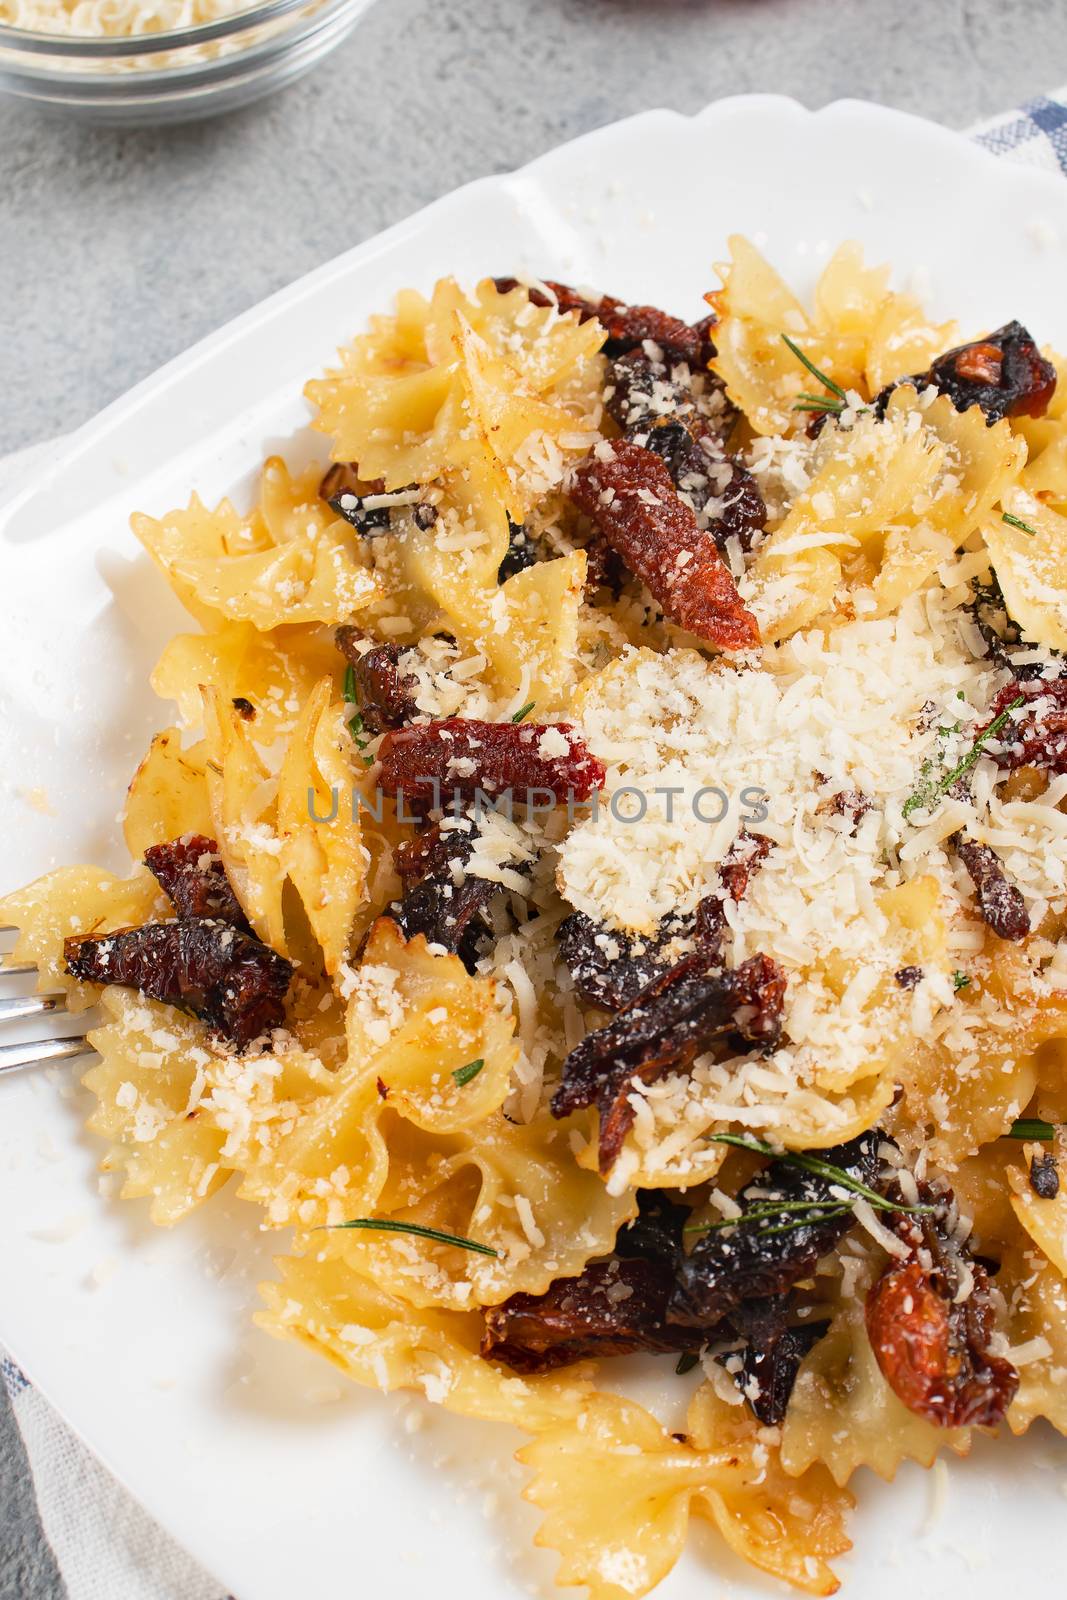 Pasta with sun dried tomatoes and parmesan in a white plate on the table. Italian food dish, vertical image by galsand